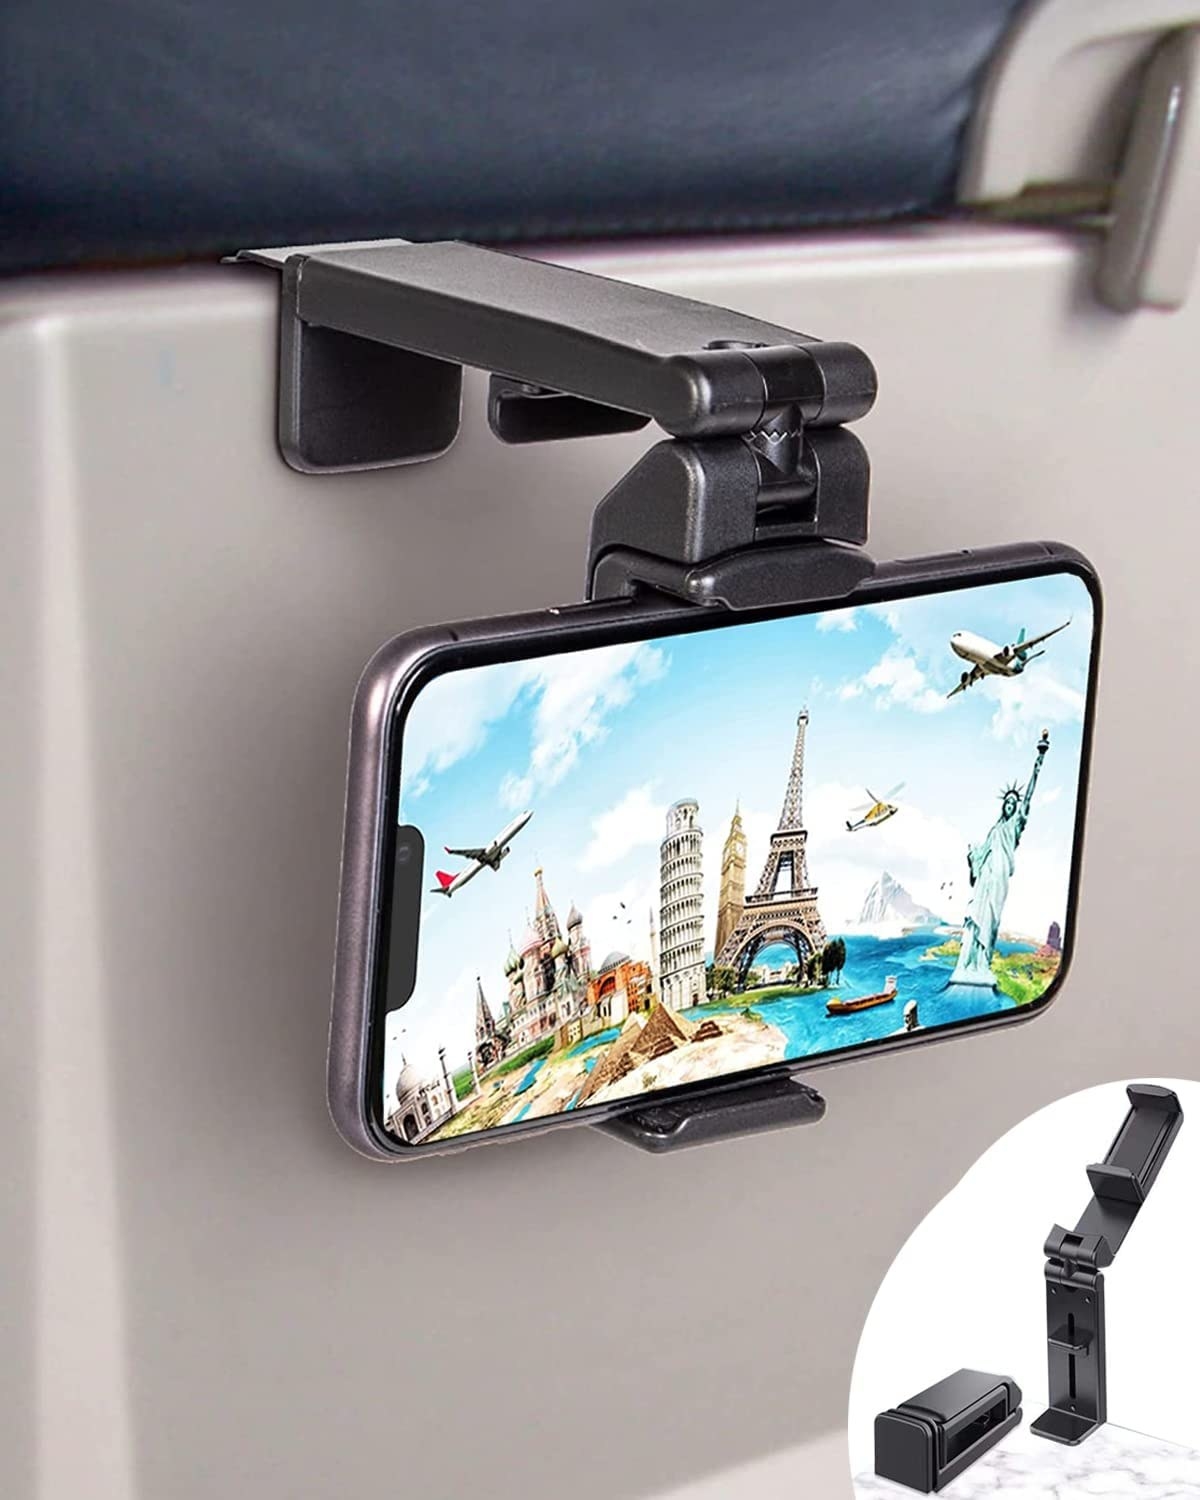 the mount holding a phone on a plane